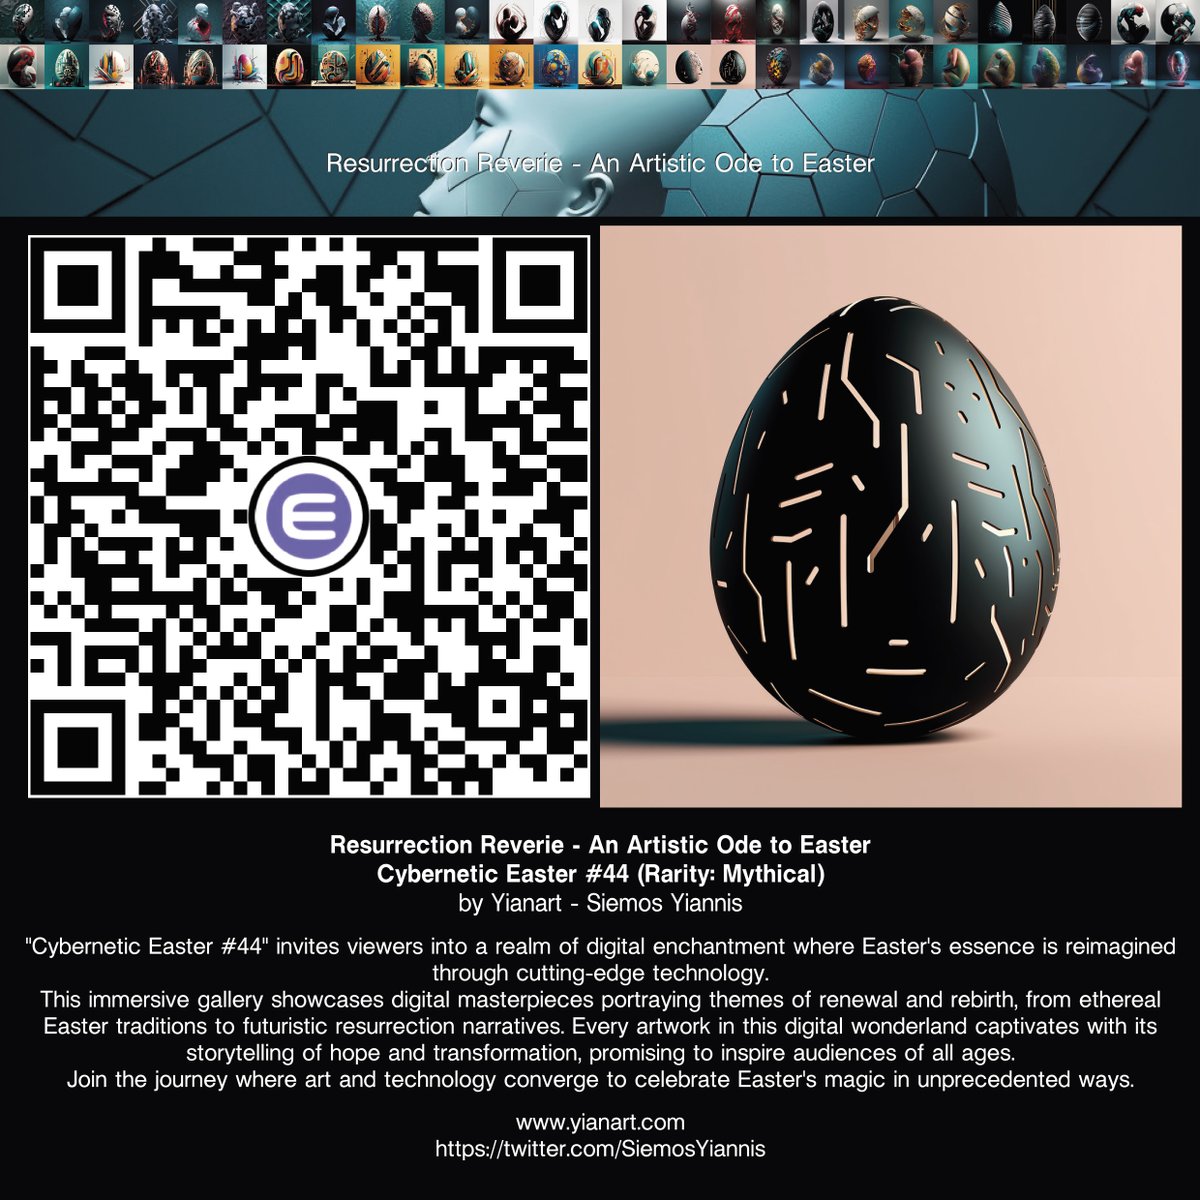 Resurrection Reverie - An Artistic Ode to Easter
Cybernetic Easter #44 (Rarity: Mythical)🥚

Claim Now!
nft.io/beam/claim/eeb…

#nft #nftarts #nftartist #nftartists #nftartwork #nftartcollector #crypto #Cryptocurency #blockchain #digitalart #yianart #enjin #easter #FuelTheEnjin